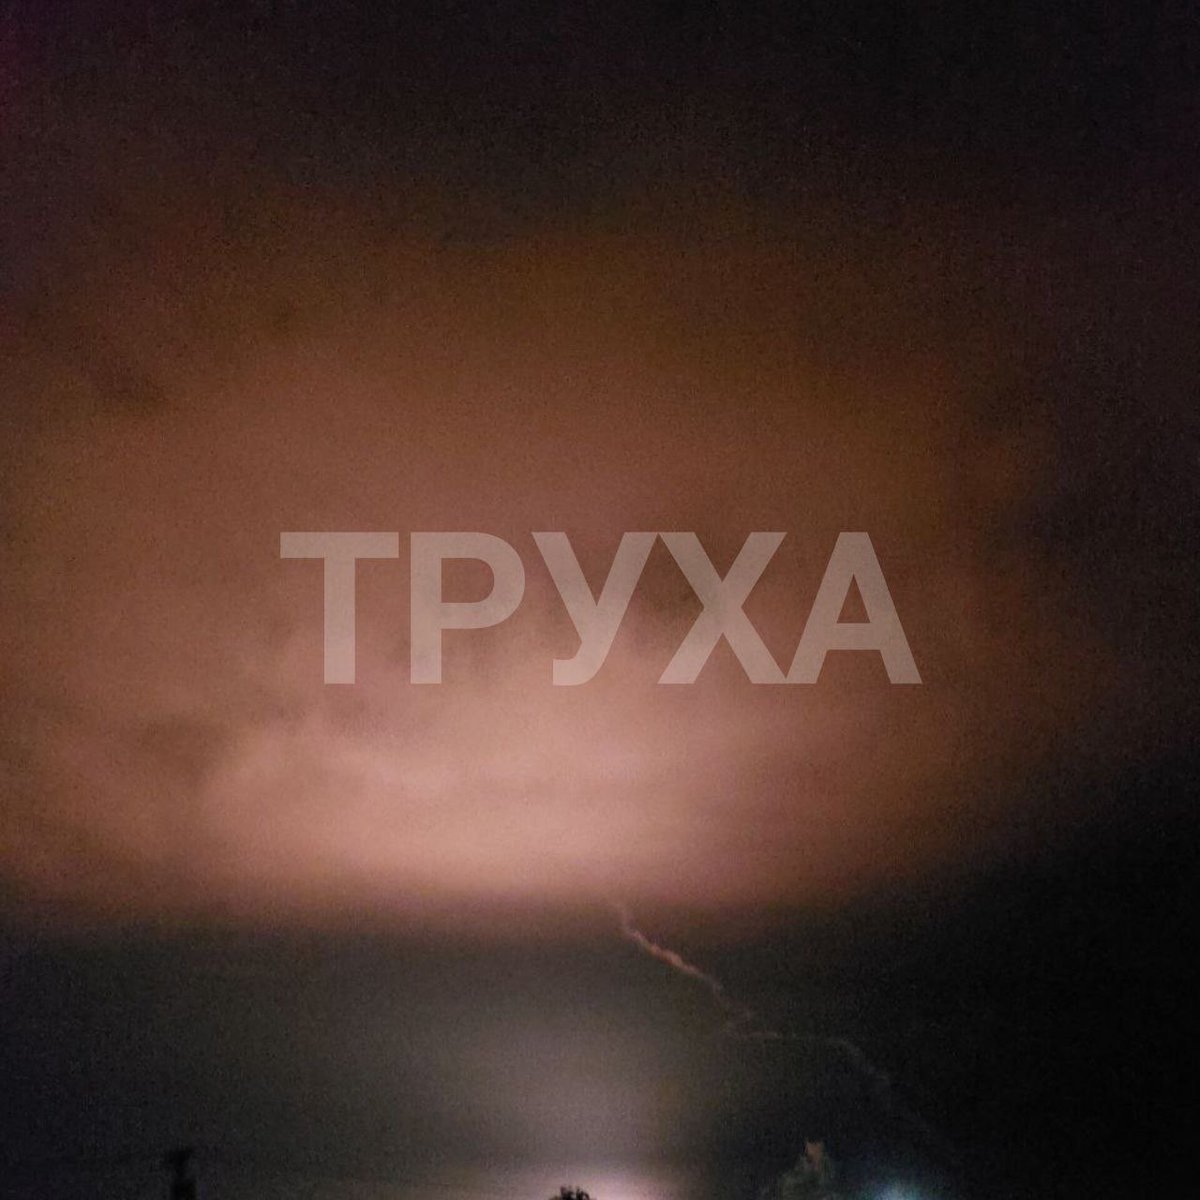 Ukrainian missile strike reported near Dzhankoi, Russian-occupied Crimea tonight. Russian air defenses active with reports of multiple explosions.